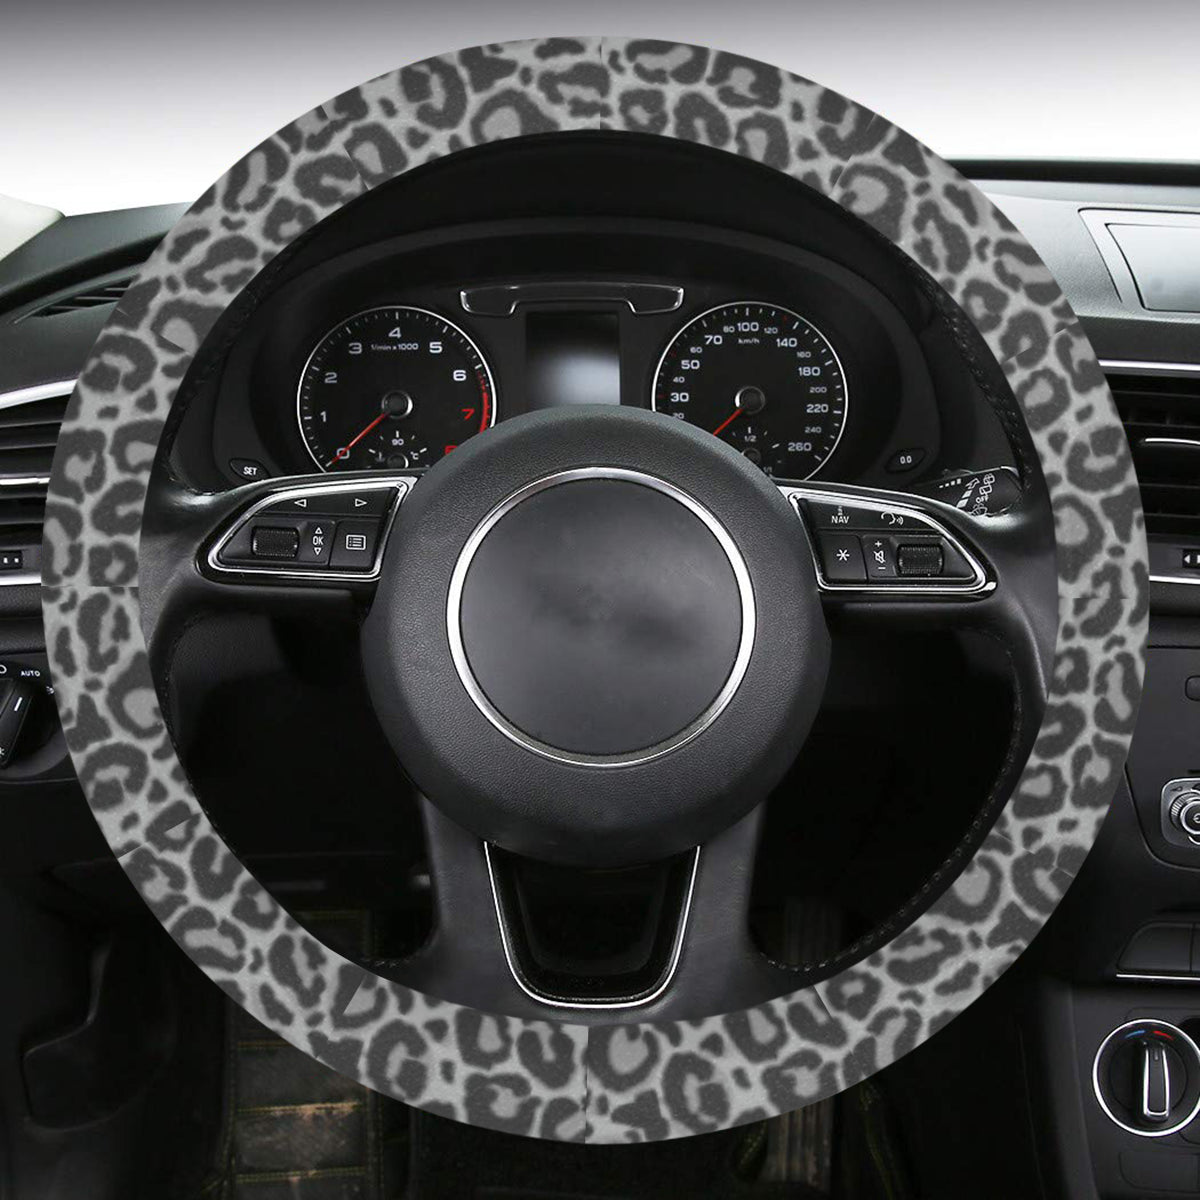 Leopard Steering Wheel Cover with Anti-Slip Insert, Grey Animal Cheetah Print Gray Car Auto Wrap Protector Women Accessories Starcove Fashion